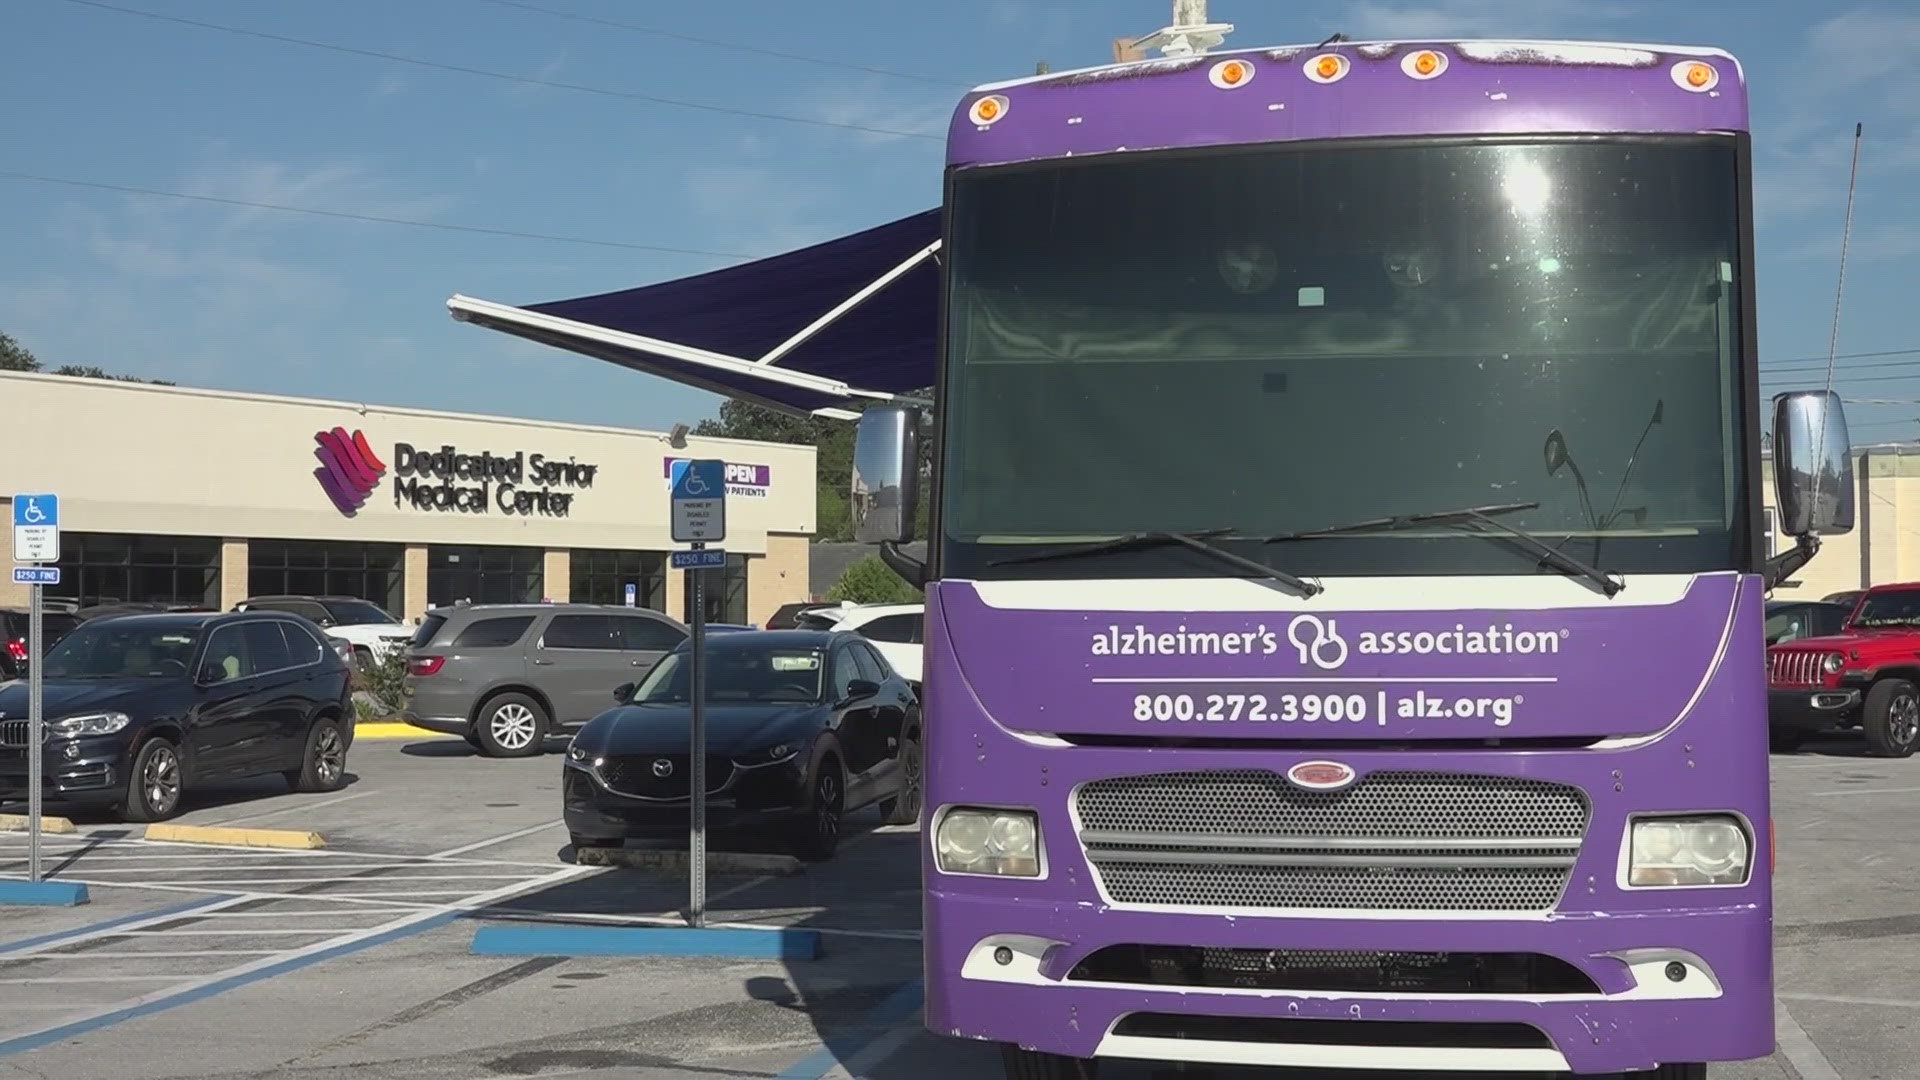 The Alzheimer's Association Brain Bus is in Jacksonville Thursday and is in Nassau County on Friday.